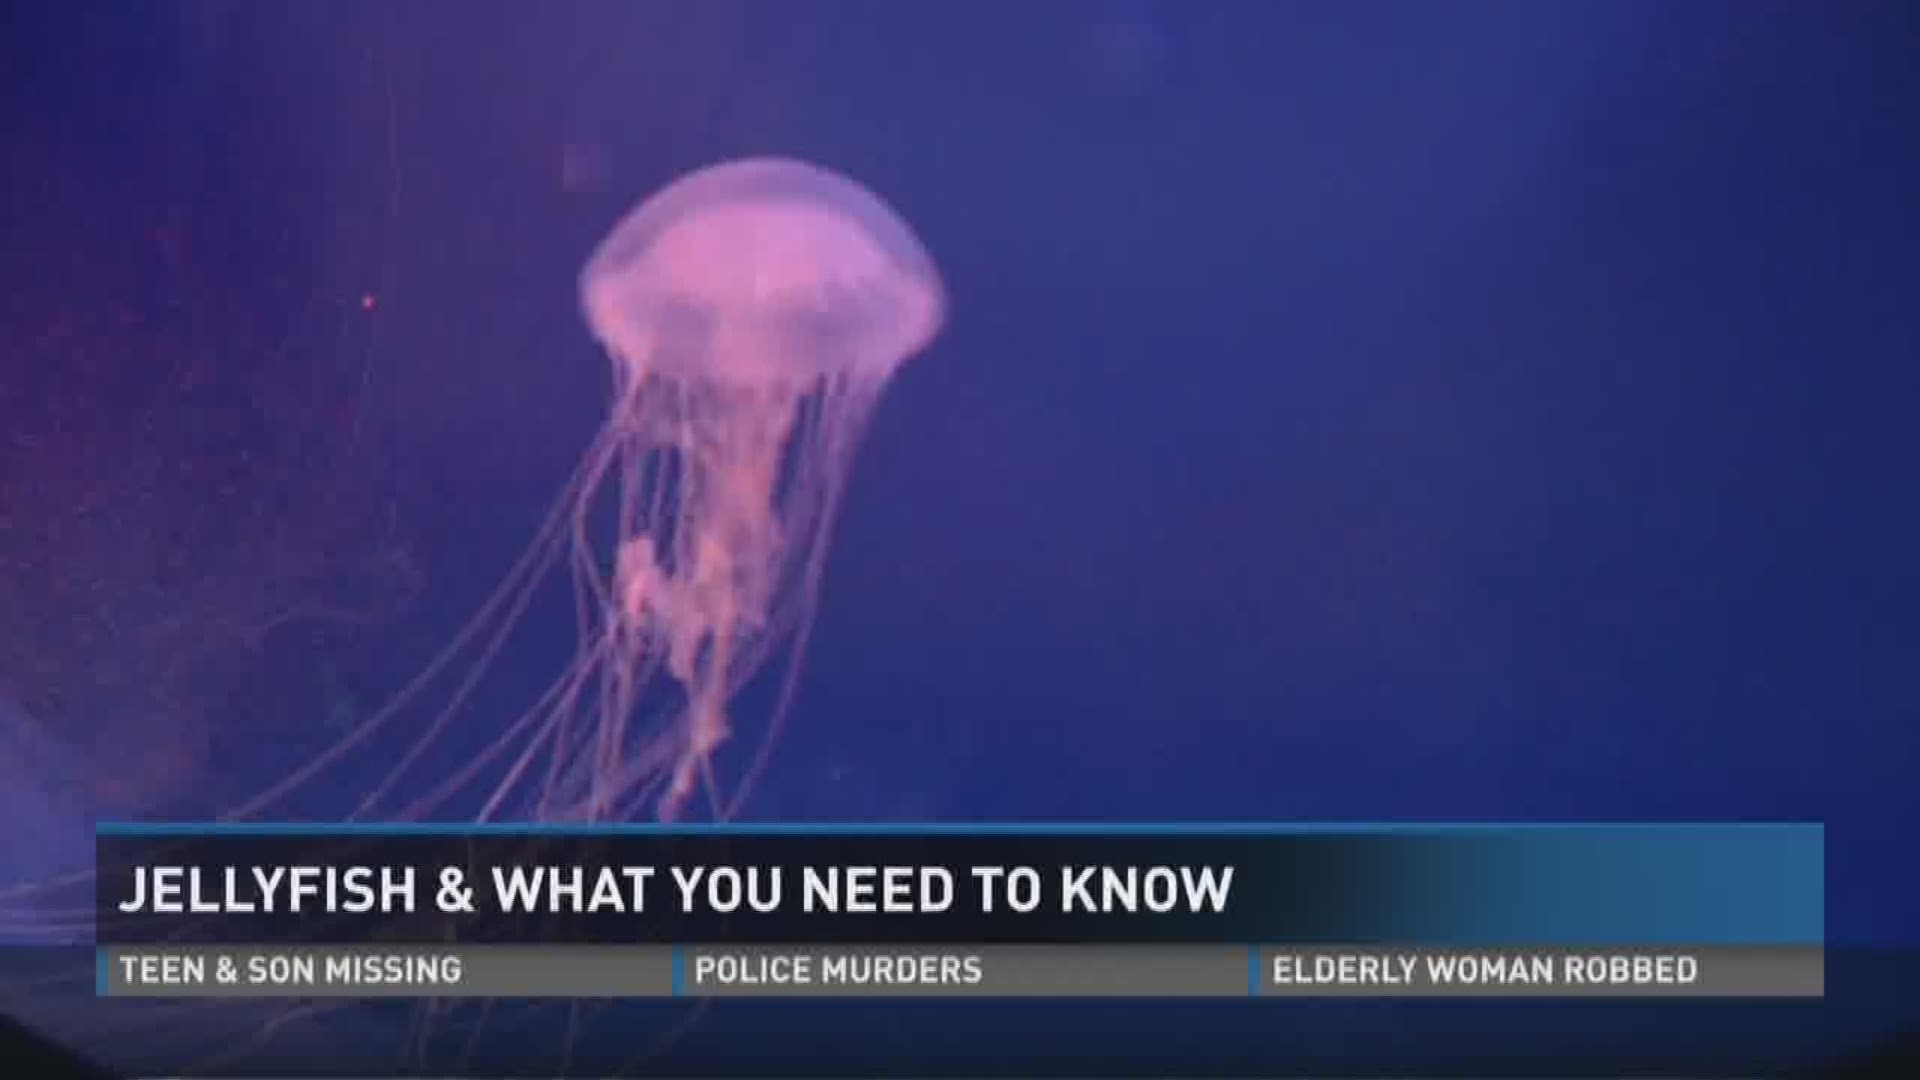 Watch out for jellyfish at the beach and in the water!